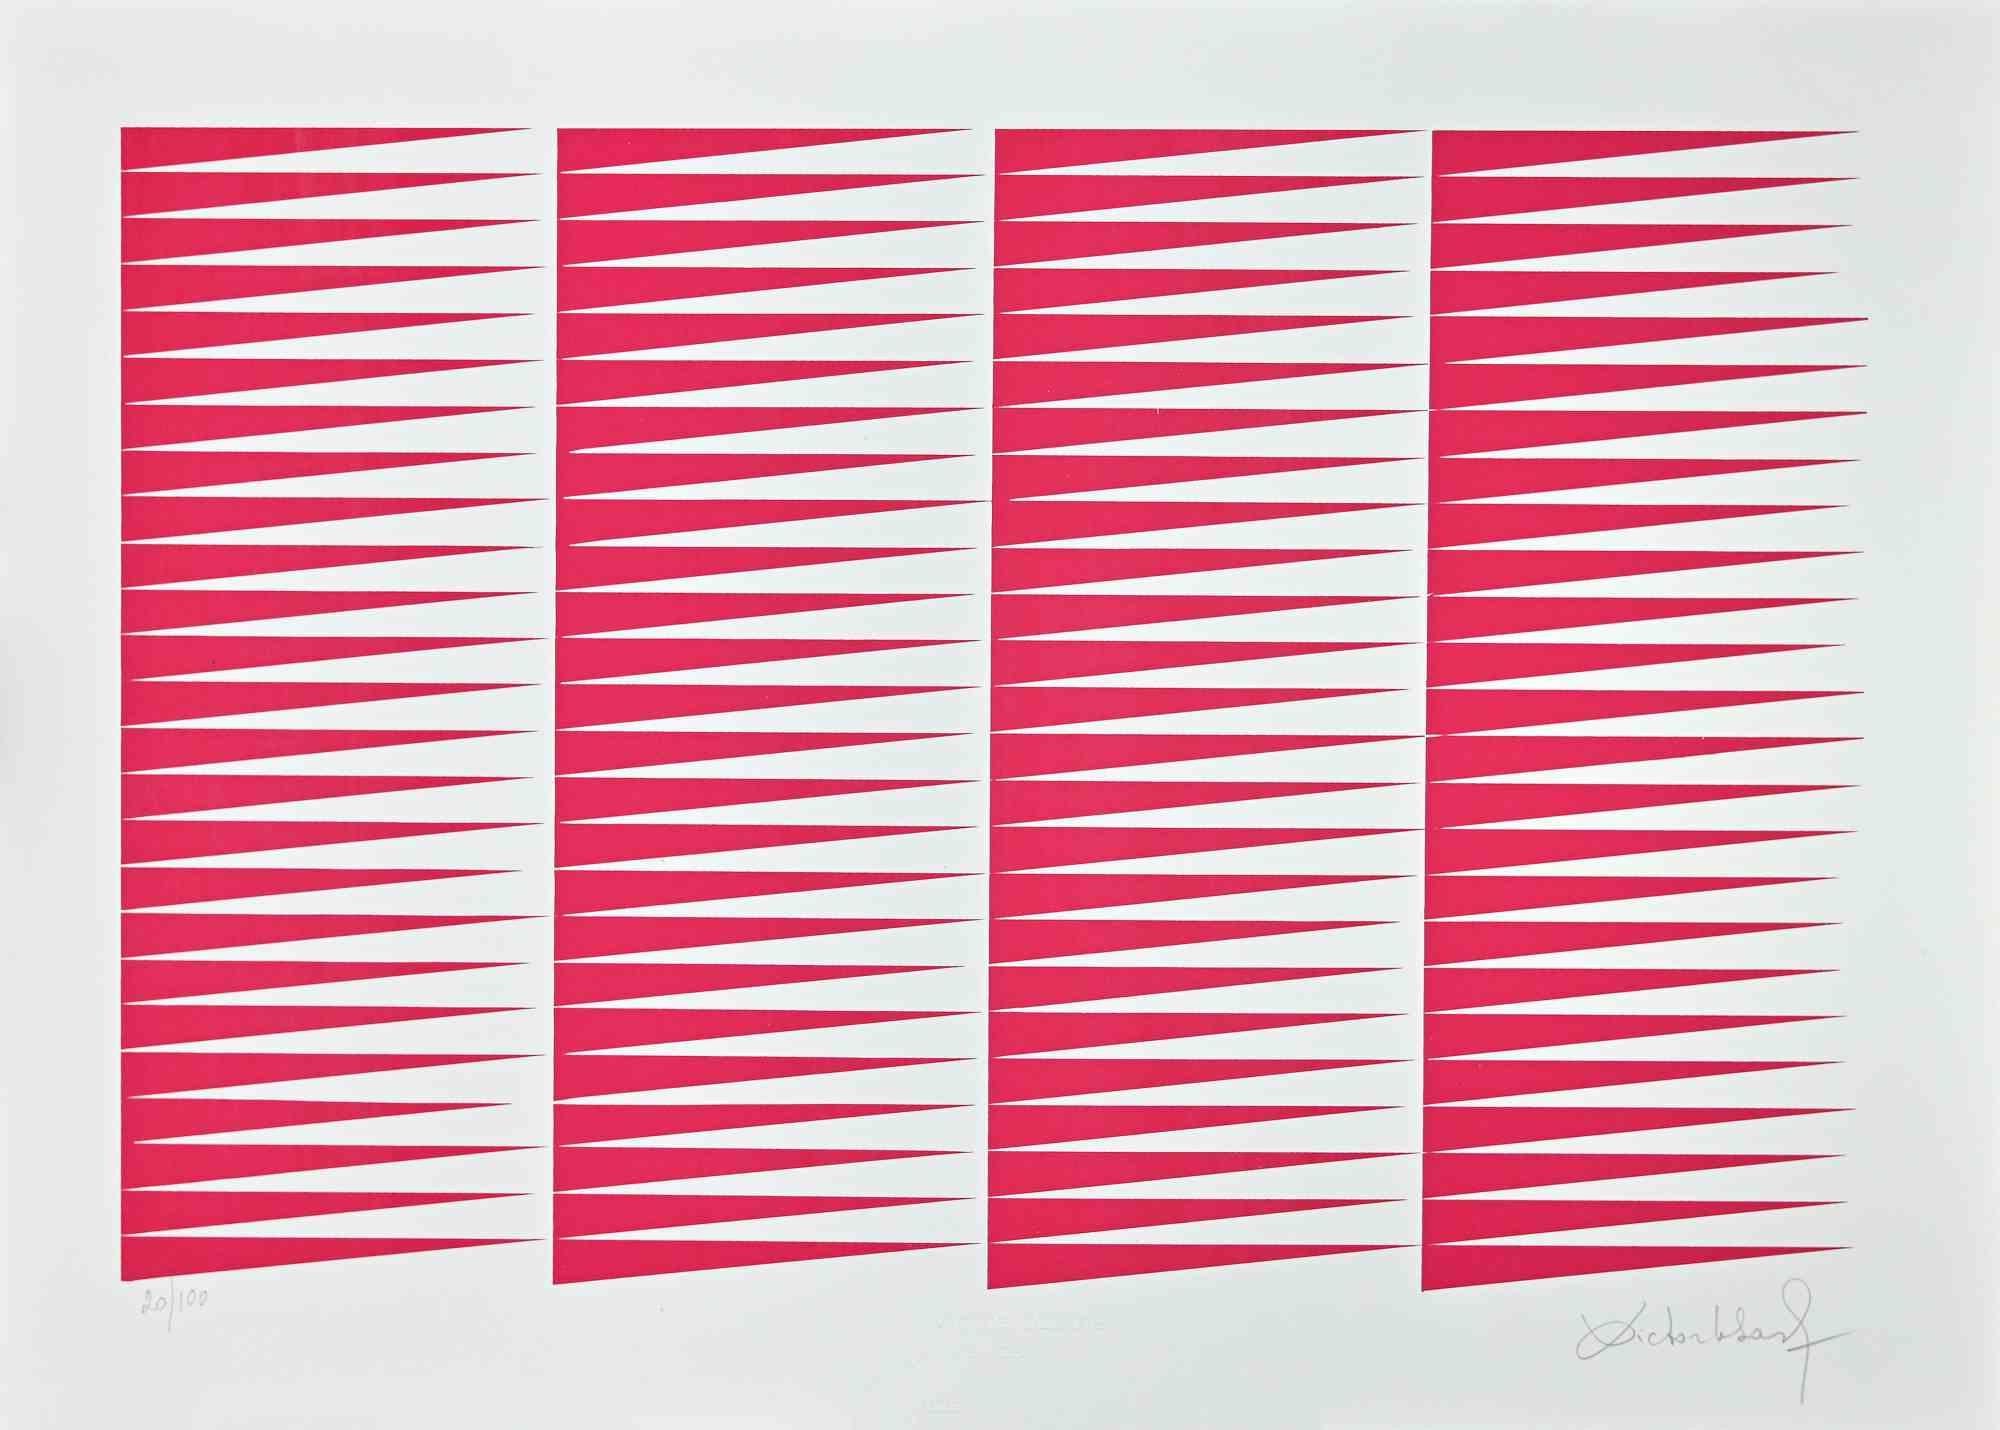 Fuchsine Composition is a screen print realized by Victor Debach in 1970s.

Hand signed and numbered. Edition of 100 prints.

Good condition.